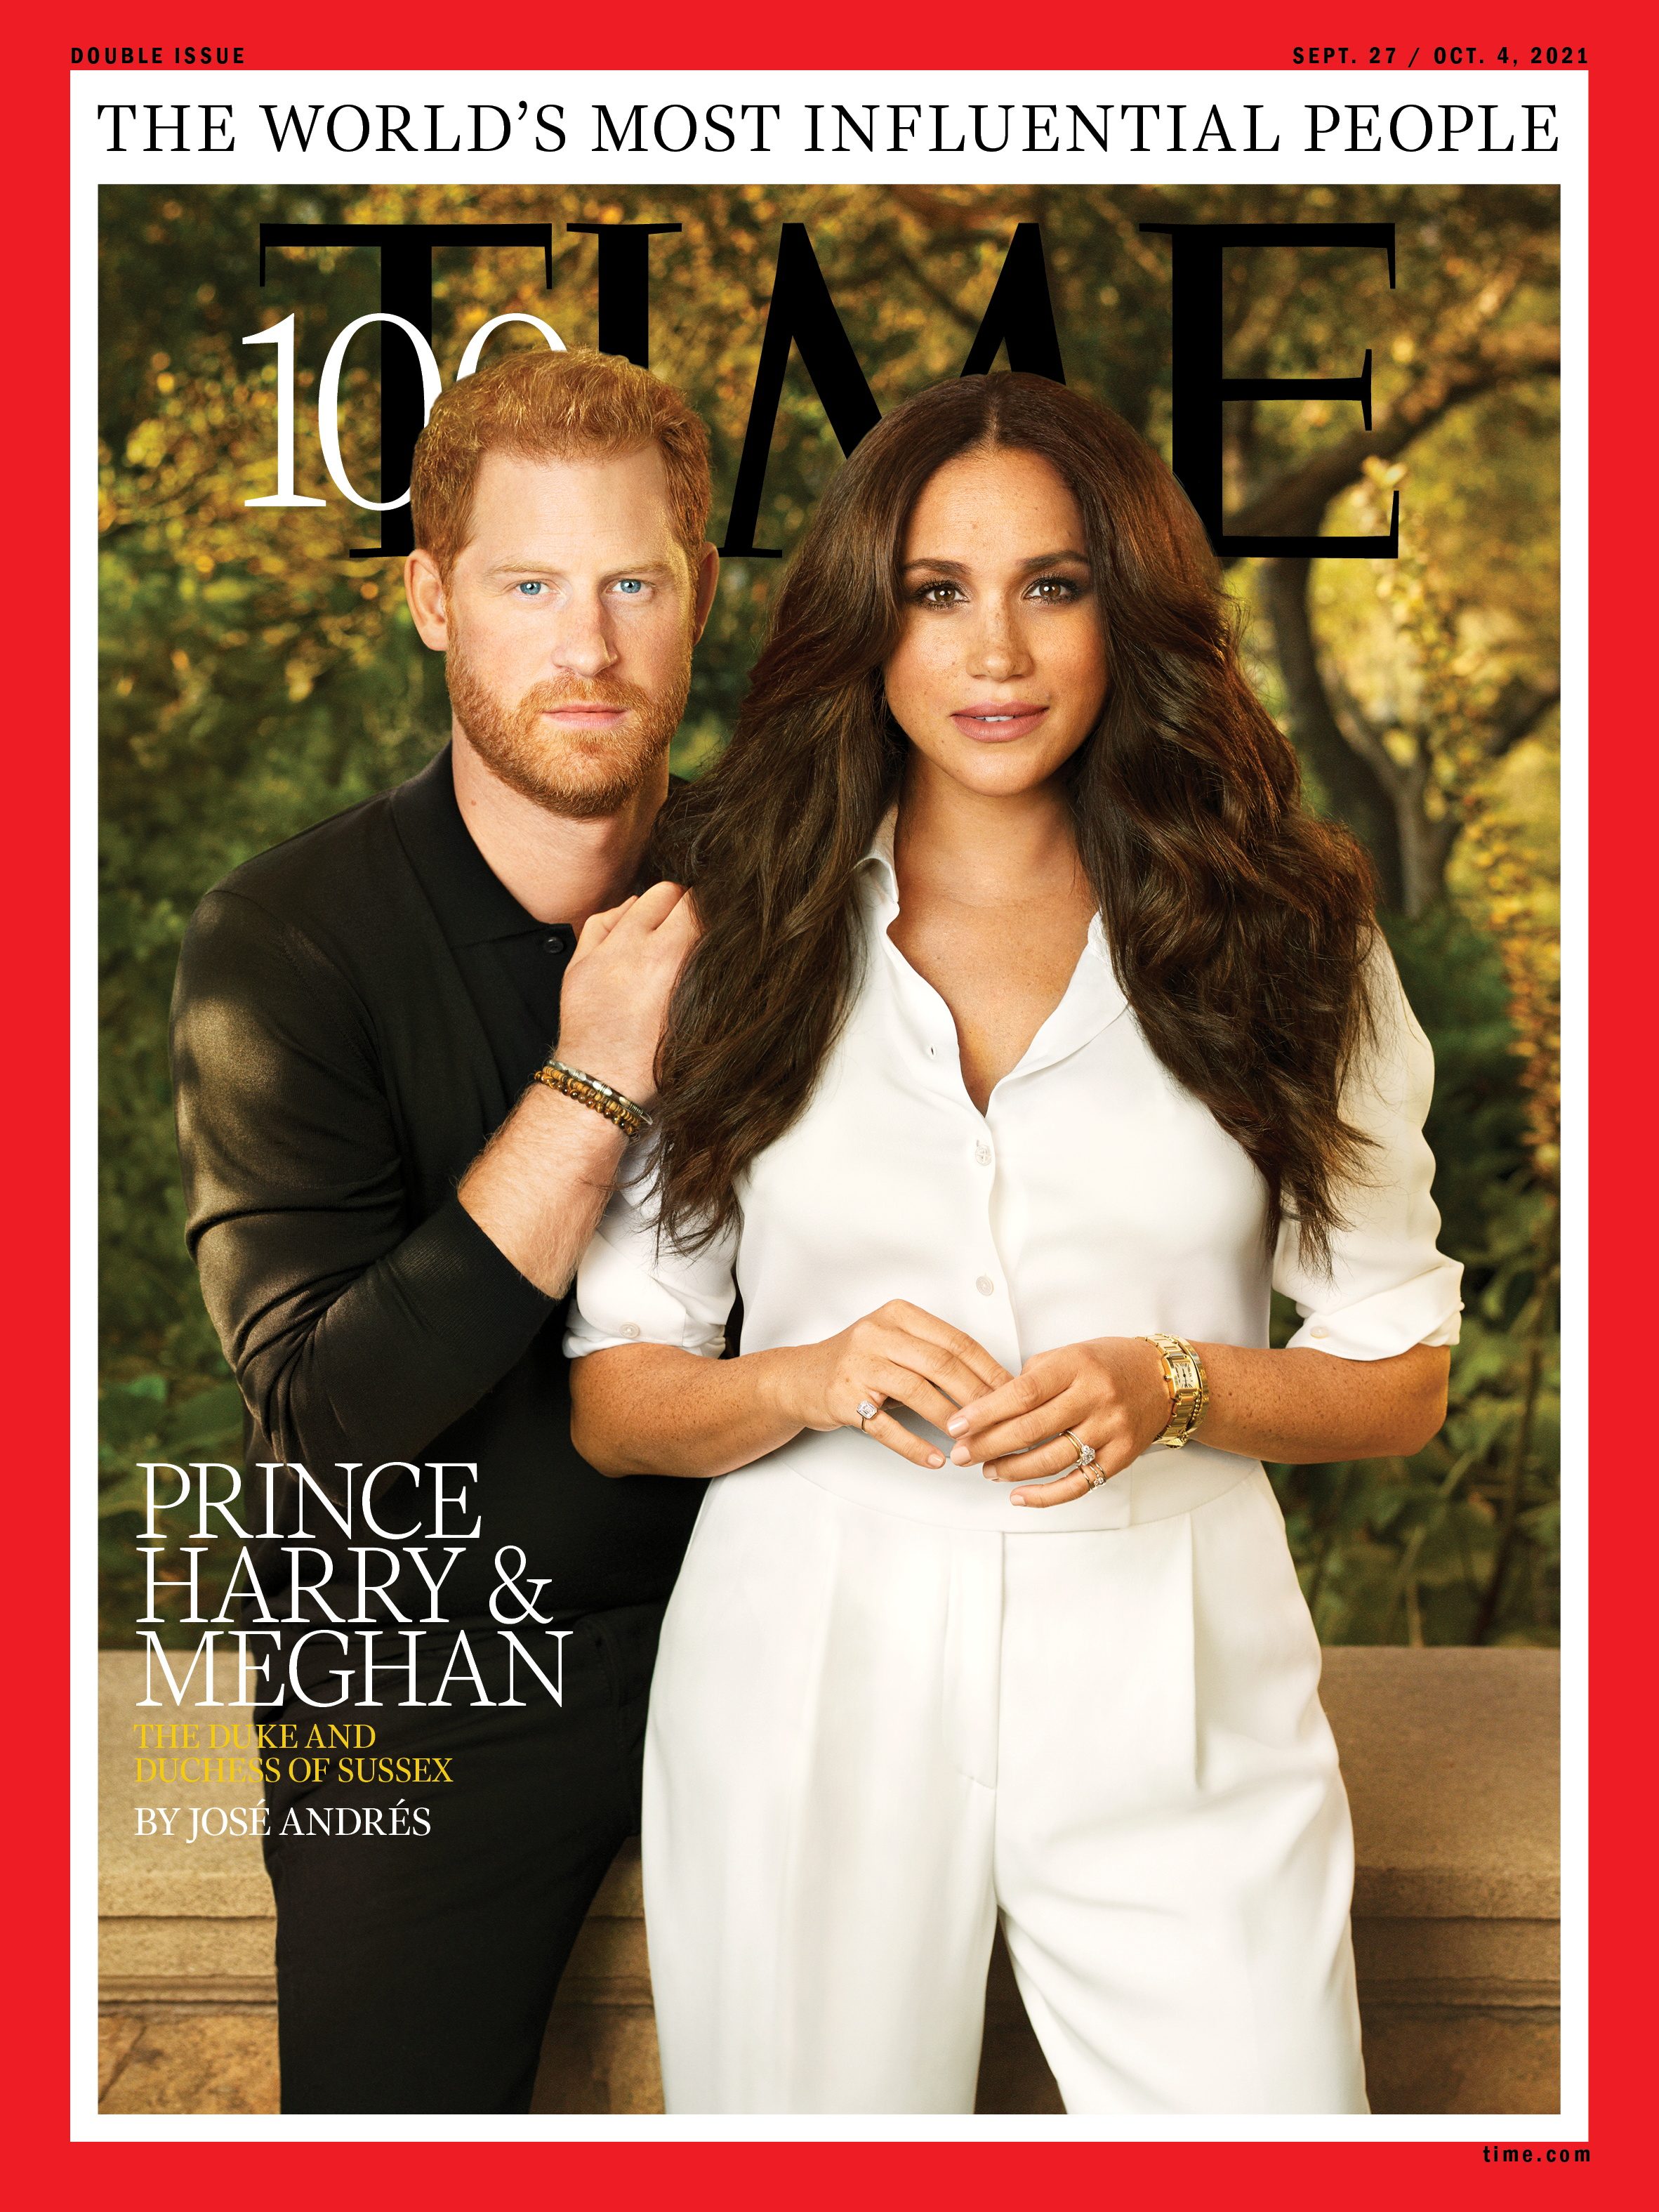 Harry and Meghan featured on Time 100 influencer list